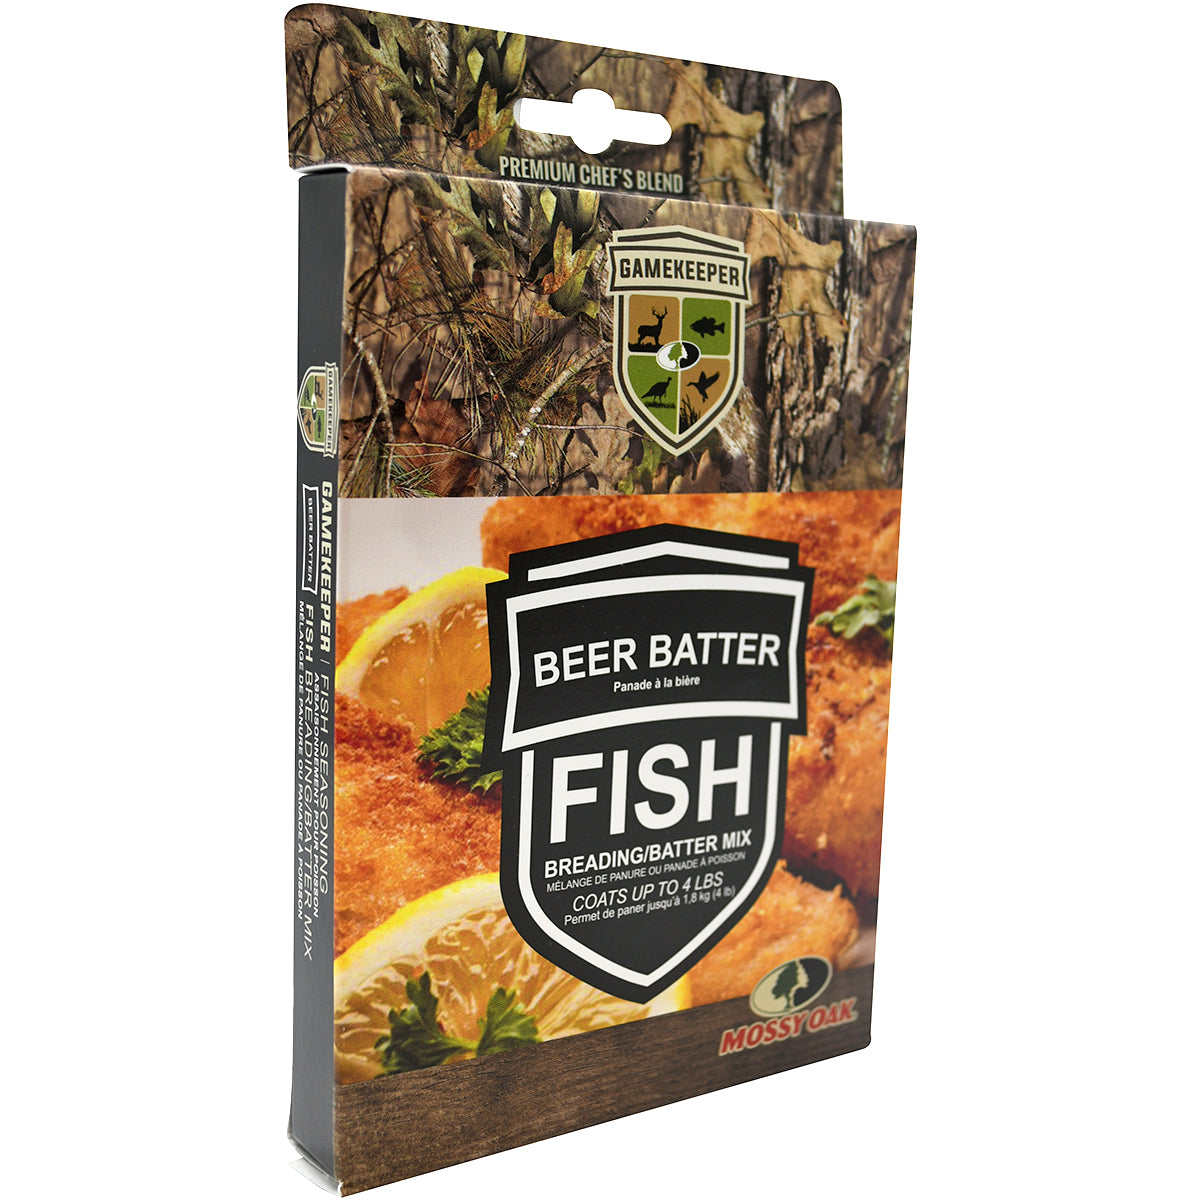 Game Keeper Beer Batter Fish Breading and Batter Mix Game Keeper